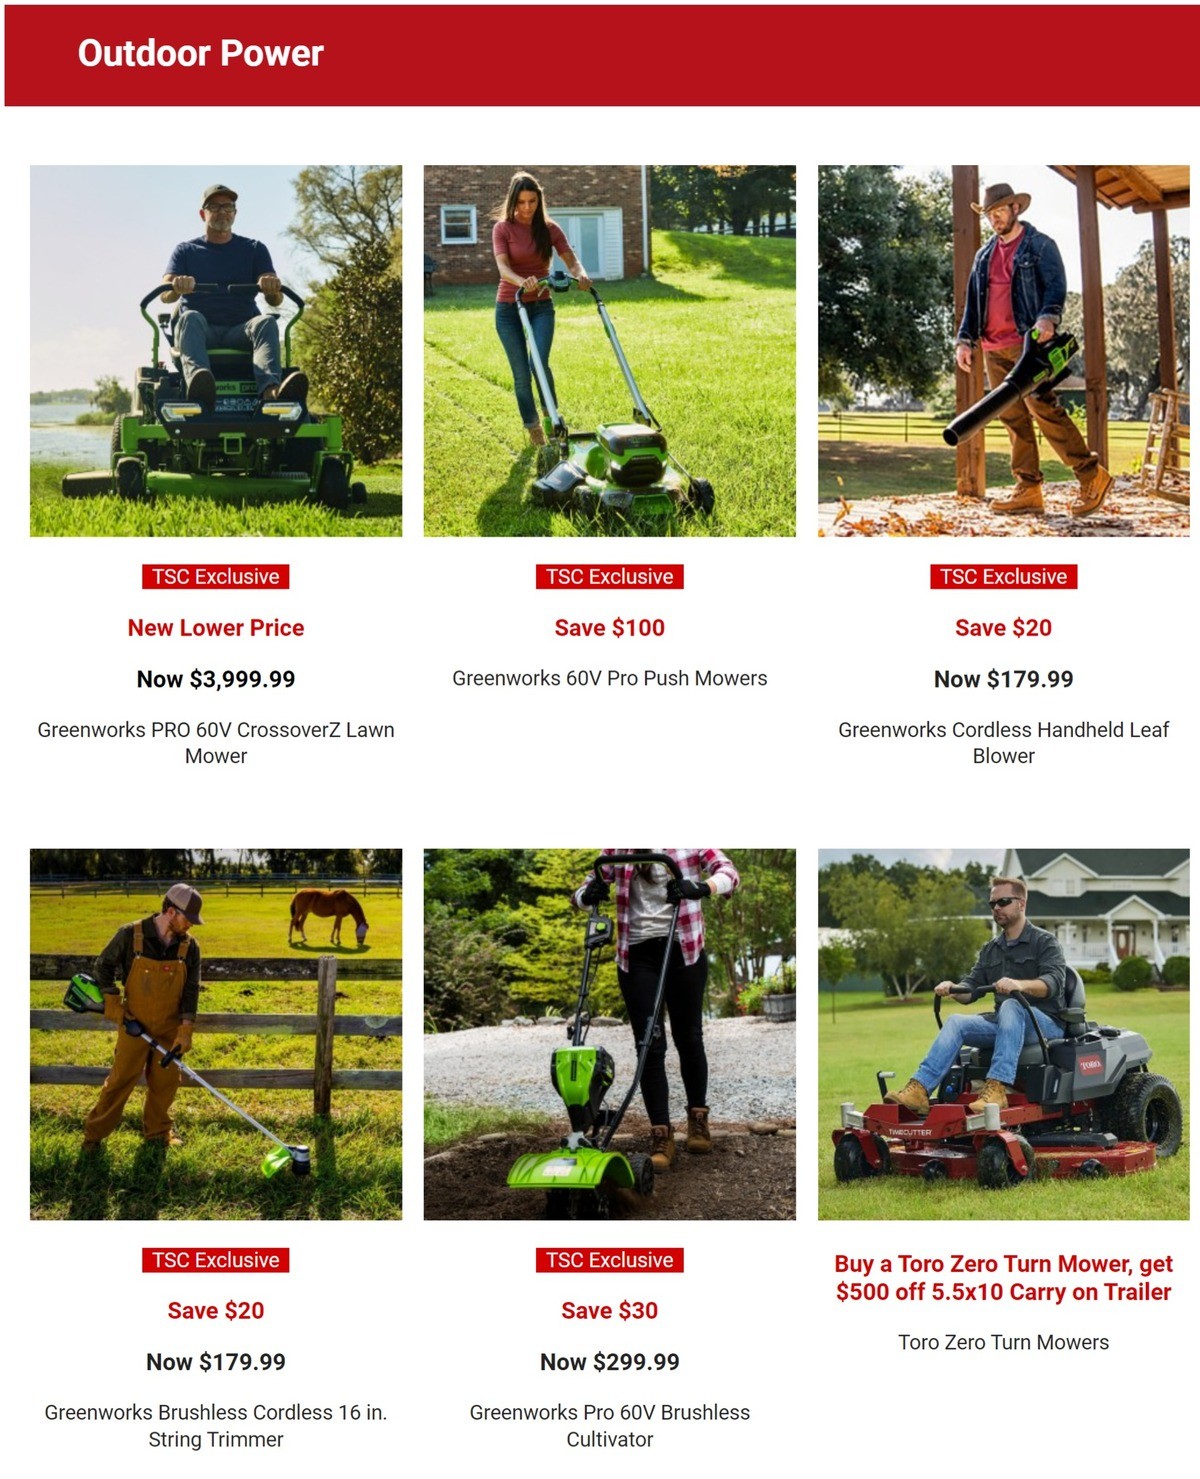 Tractor Supply Weekly Ad from March 13